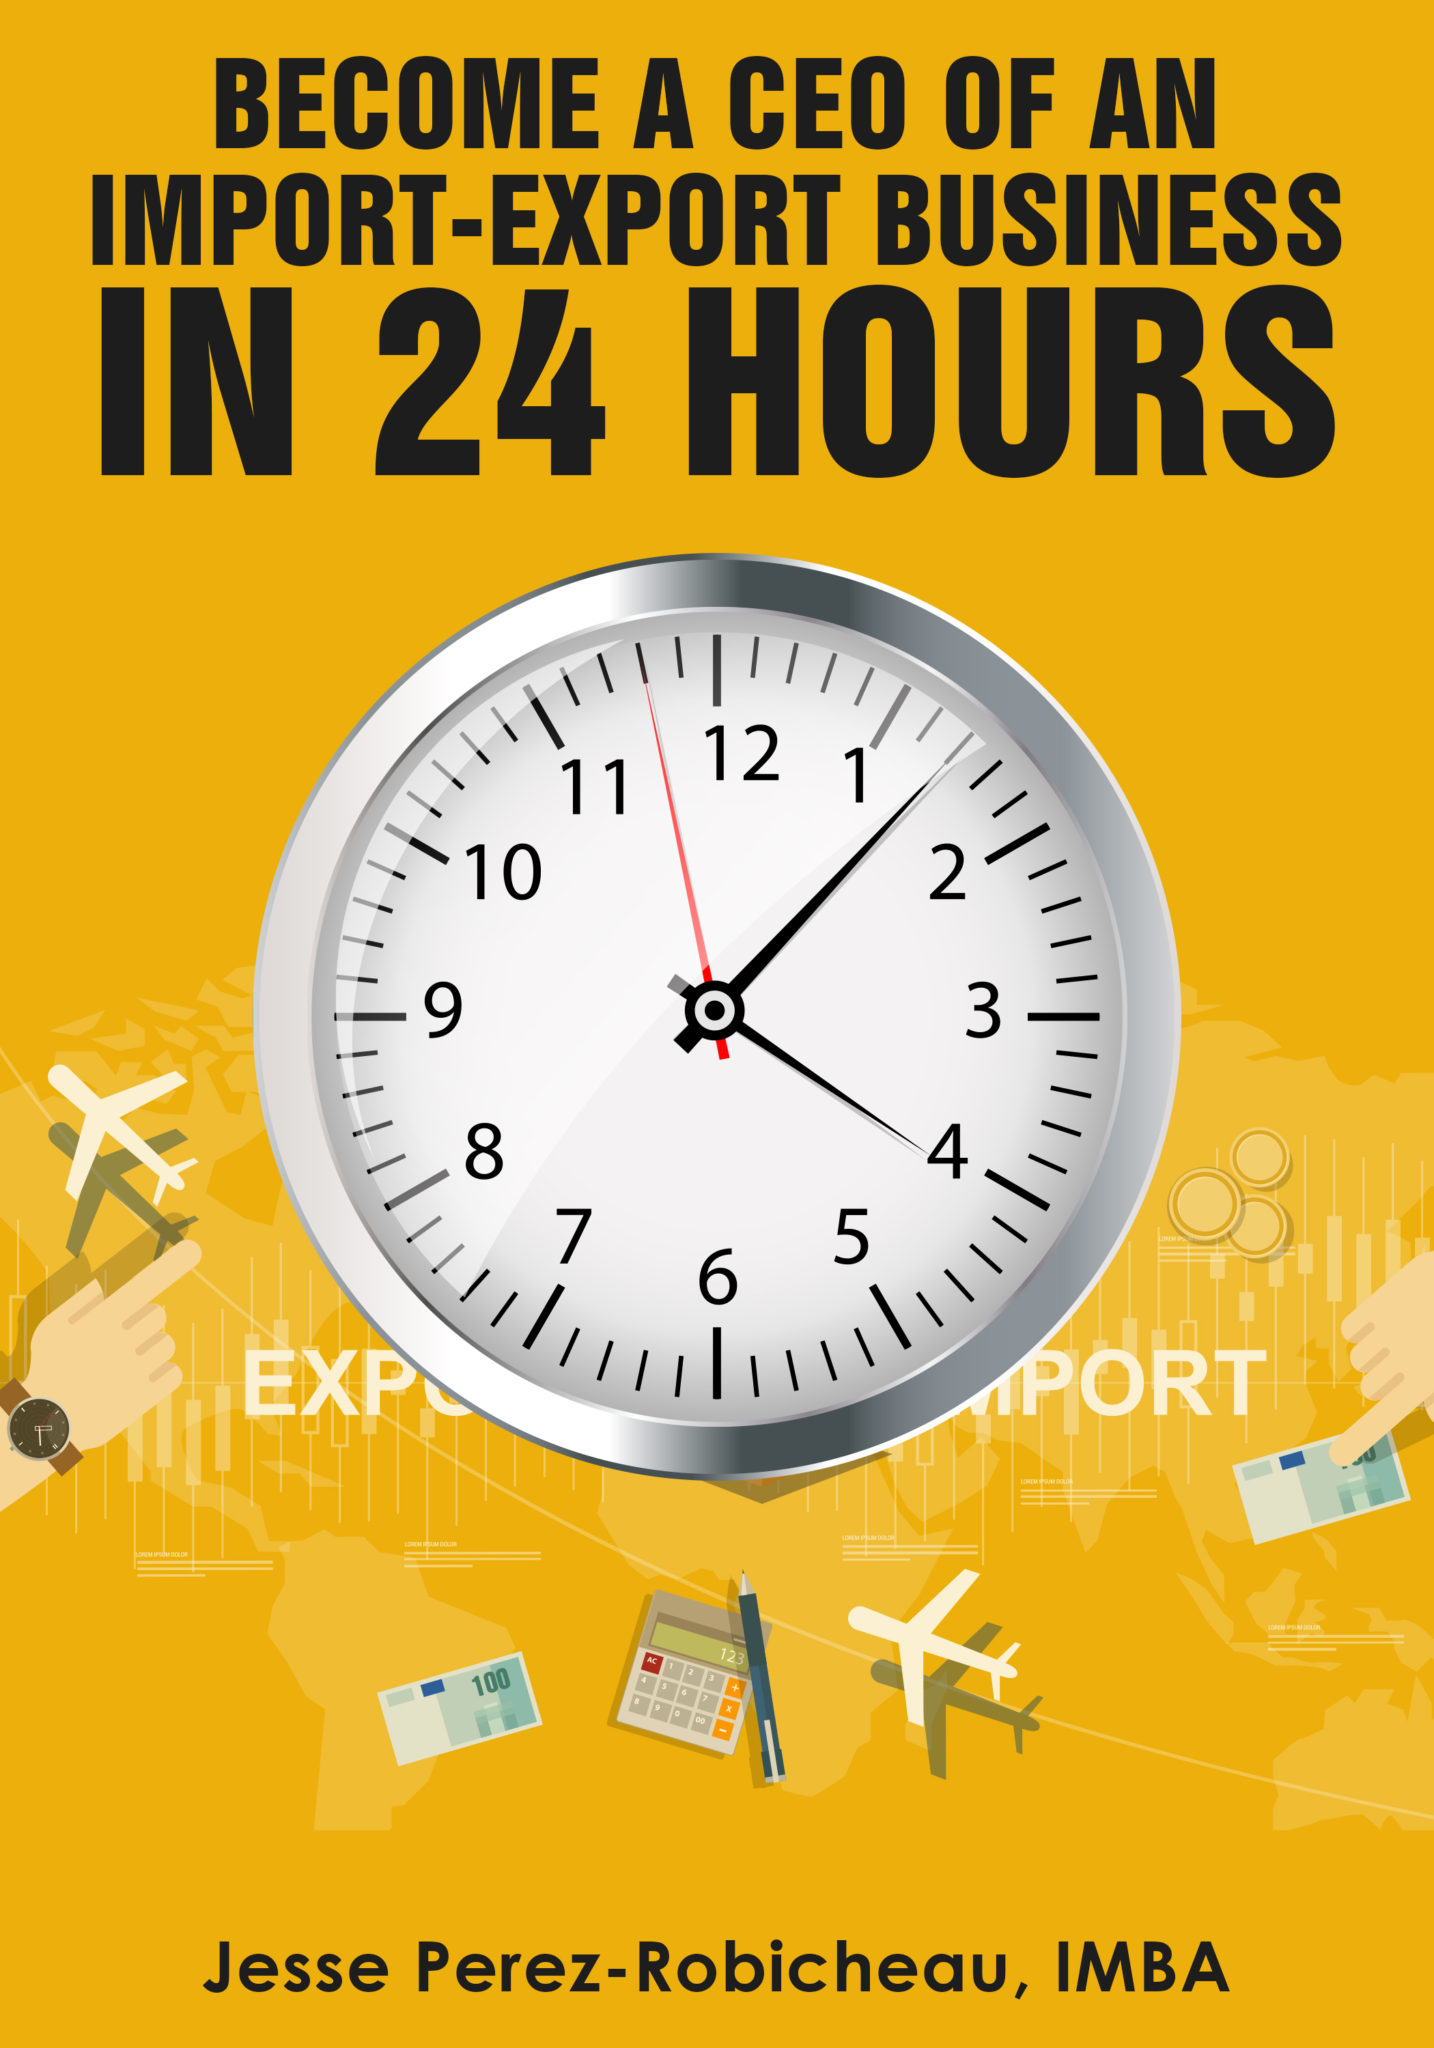 FREE: Become a CEO of an Import-Export Business in 24 Hours by Jesse Perez-Robicheau